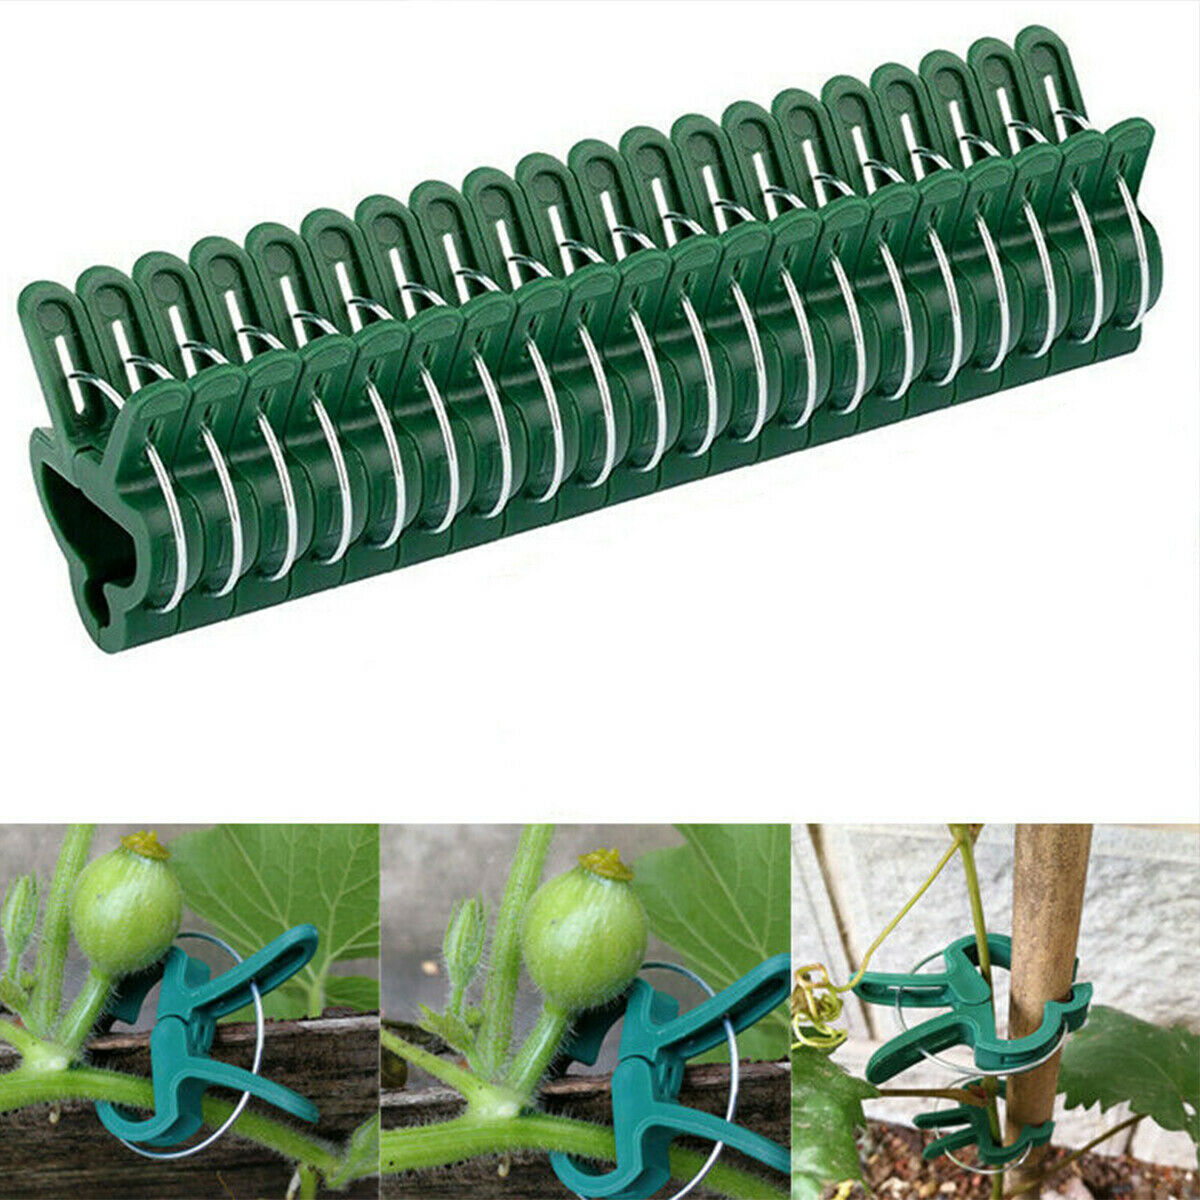 20PCS Garden Plant Clips Tomato Tie Stem Orchid Support Weatherproof Grow Training